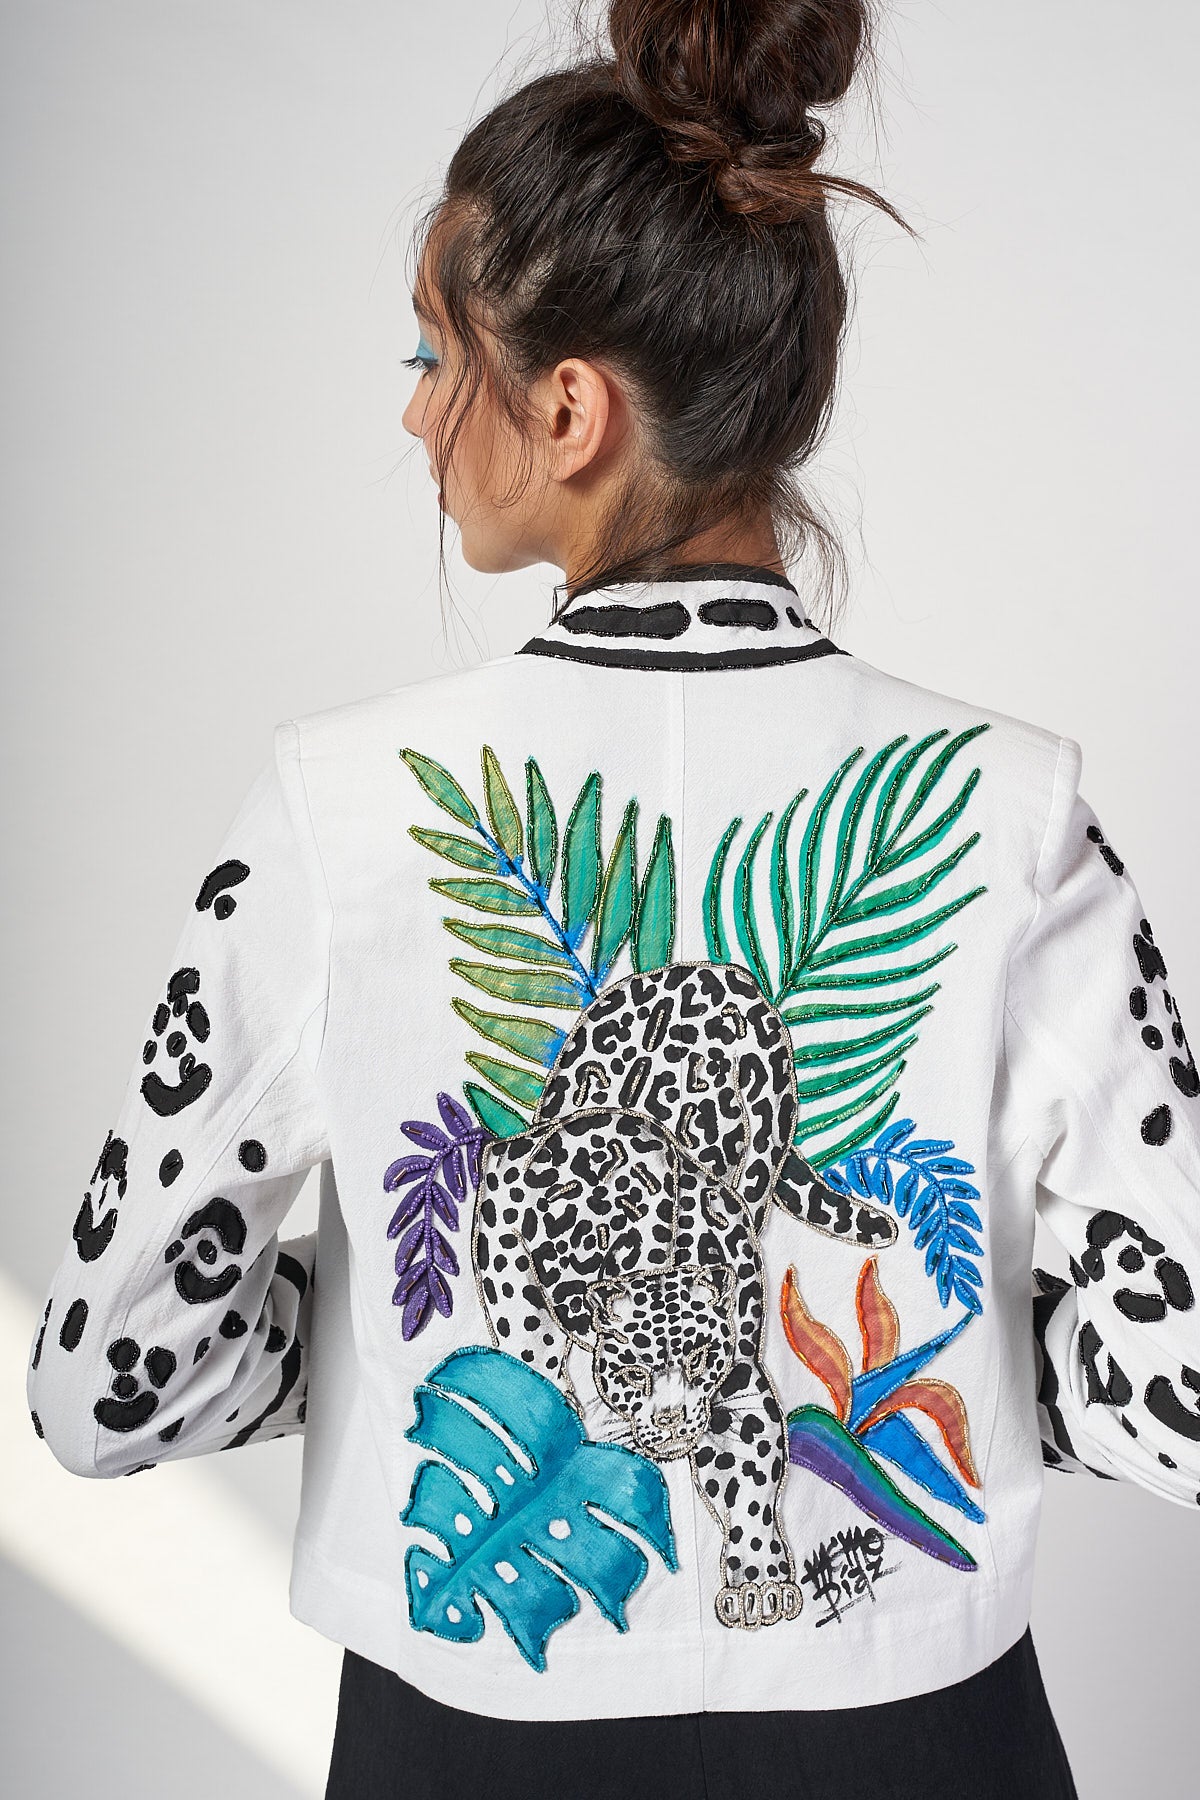 HAND-PAINTED AND HAND-EMBROIDERED JACKET - JAGUAR DYNASTY